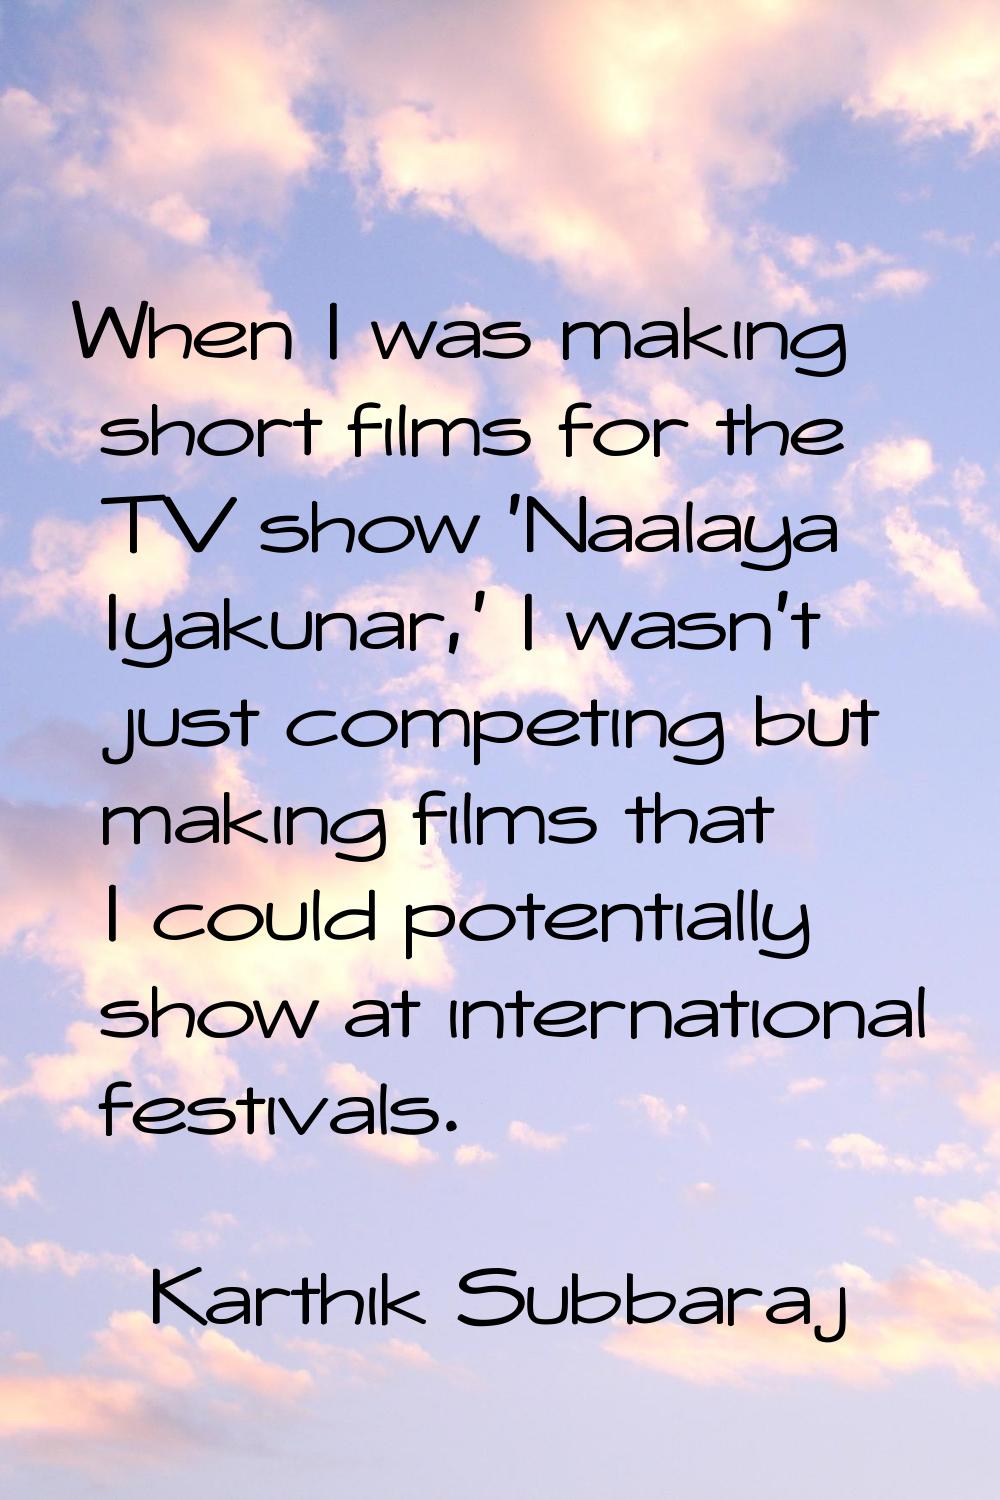 When I was making short films for the TV show 'Naalaya Iyakunar,' I wasn't just competing but makin